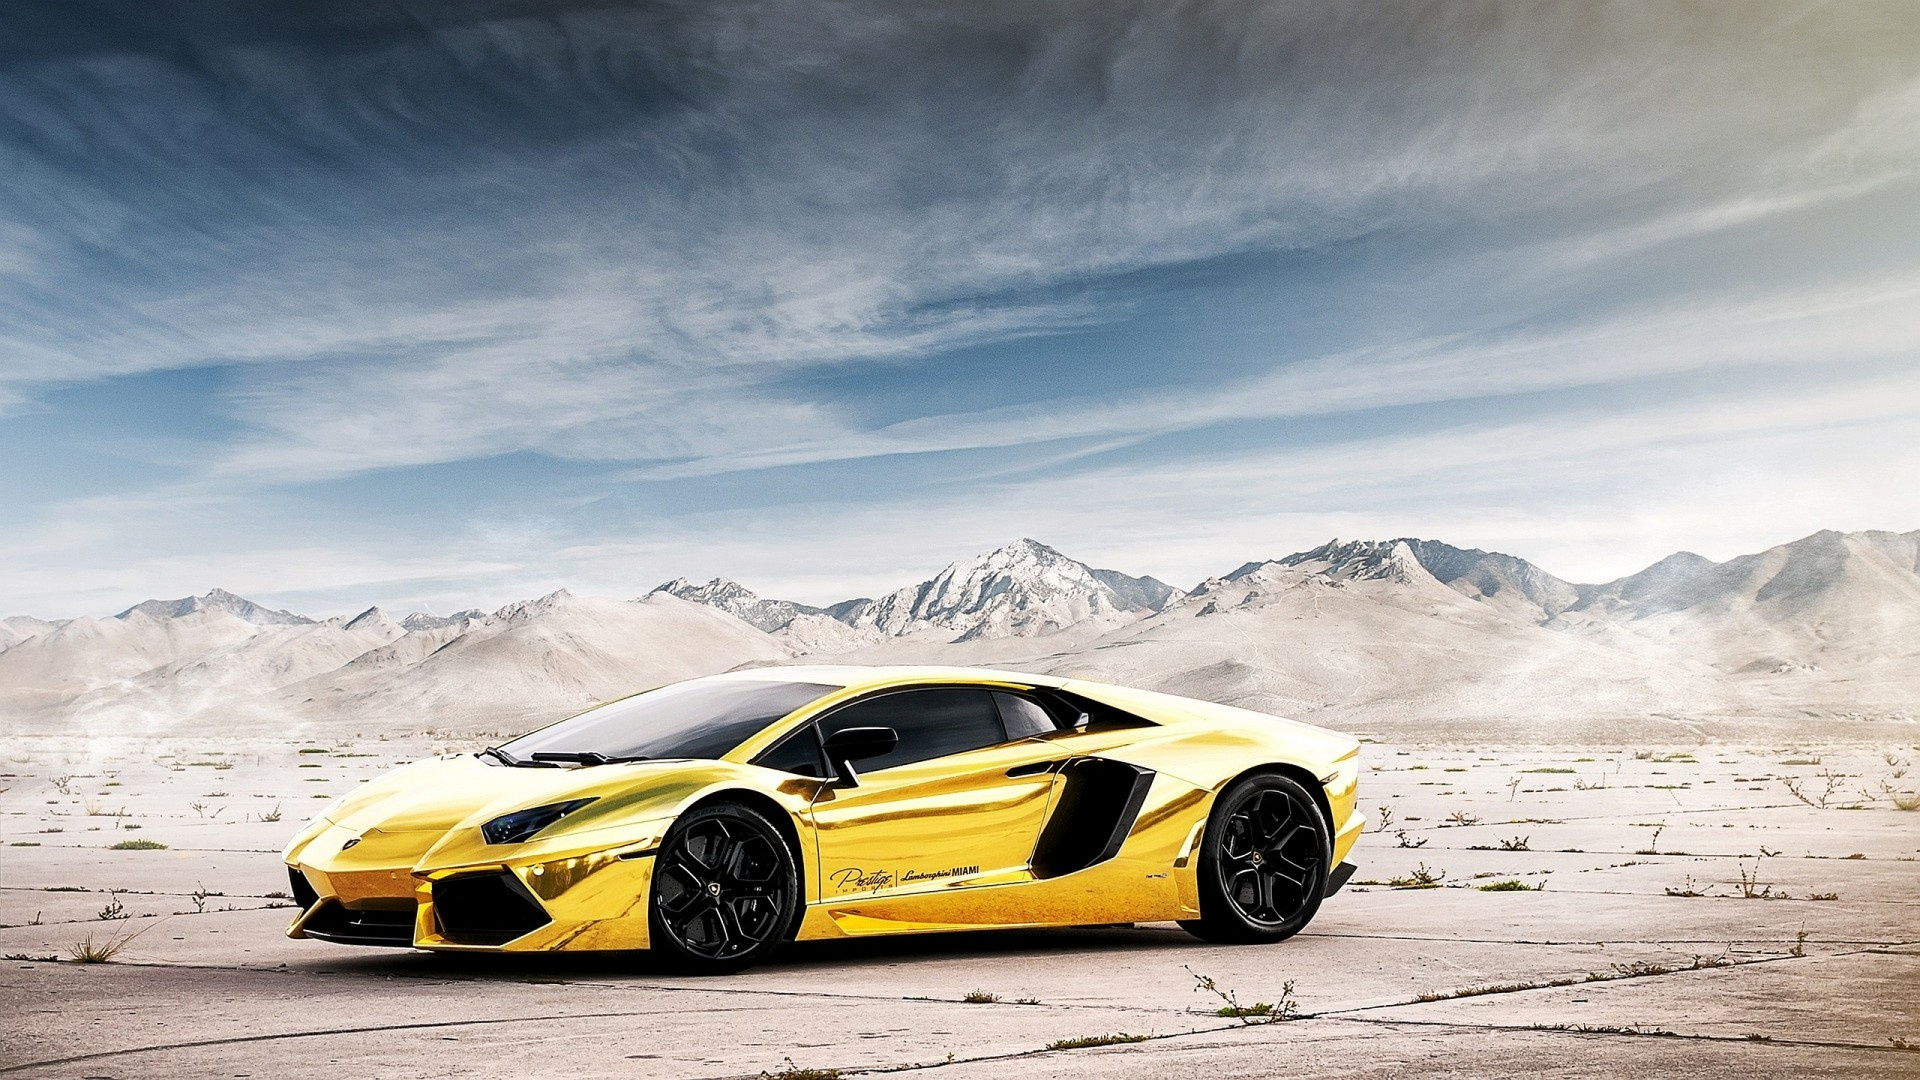 Yellow Lamborghini Aventador on Snow Covered Field During Daytime. Wallpaper in 1920x1080 Resolution